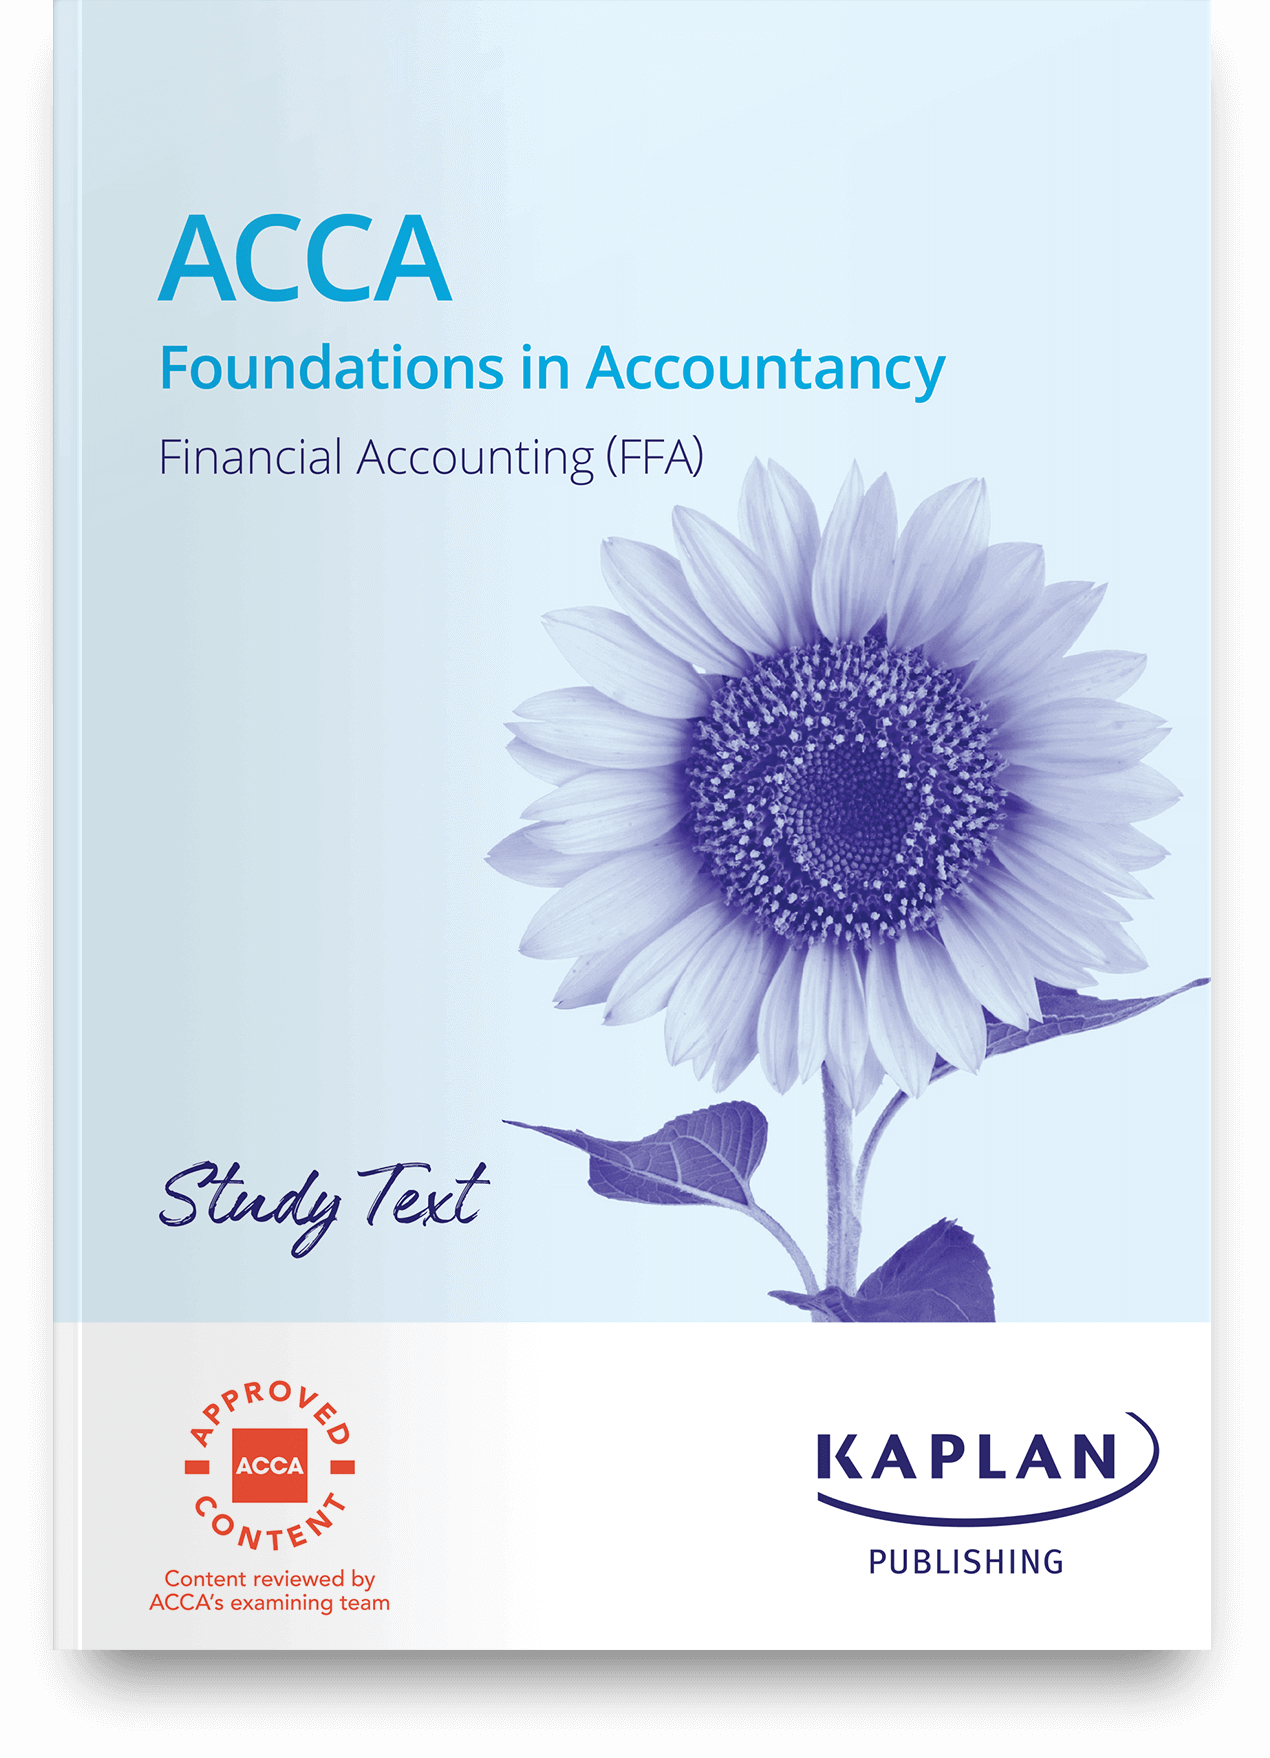 ACCA Foundations - Financial Accounting (FFA) - Study Text